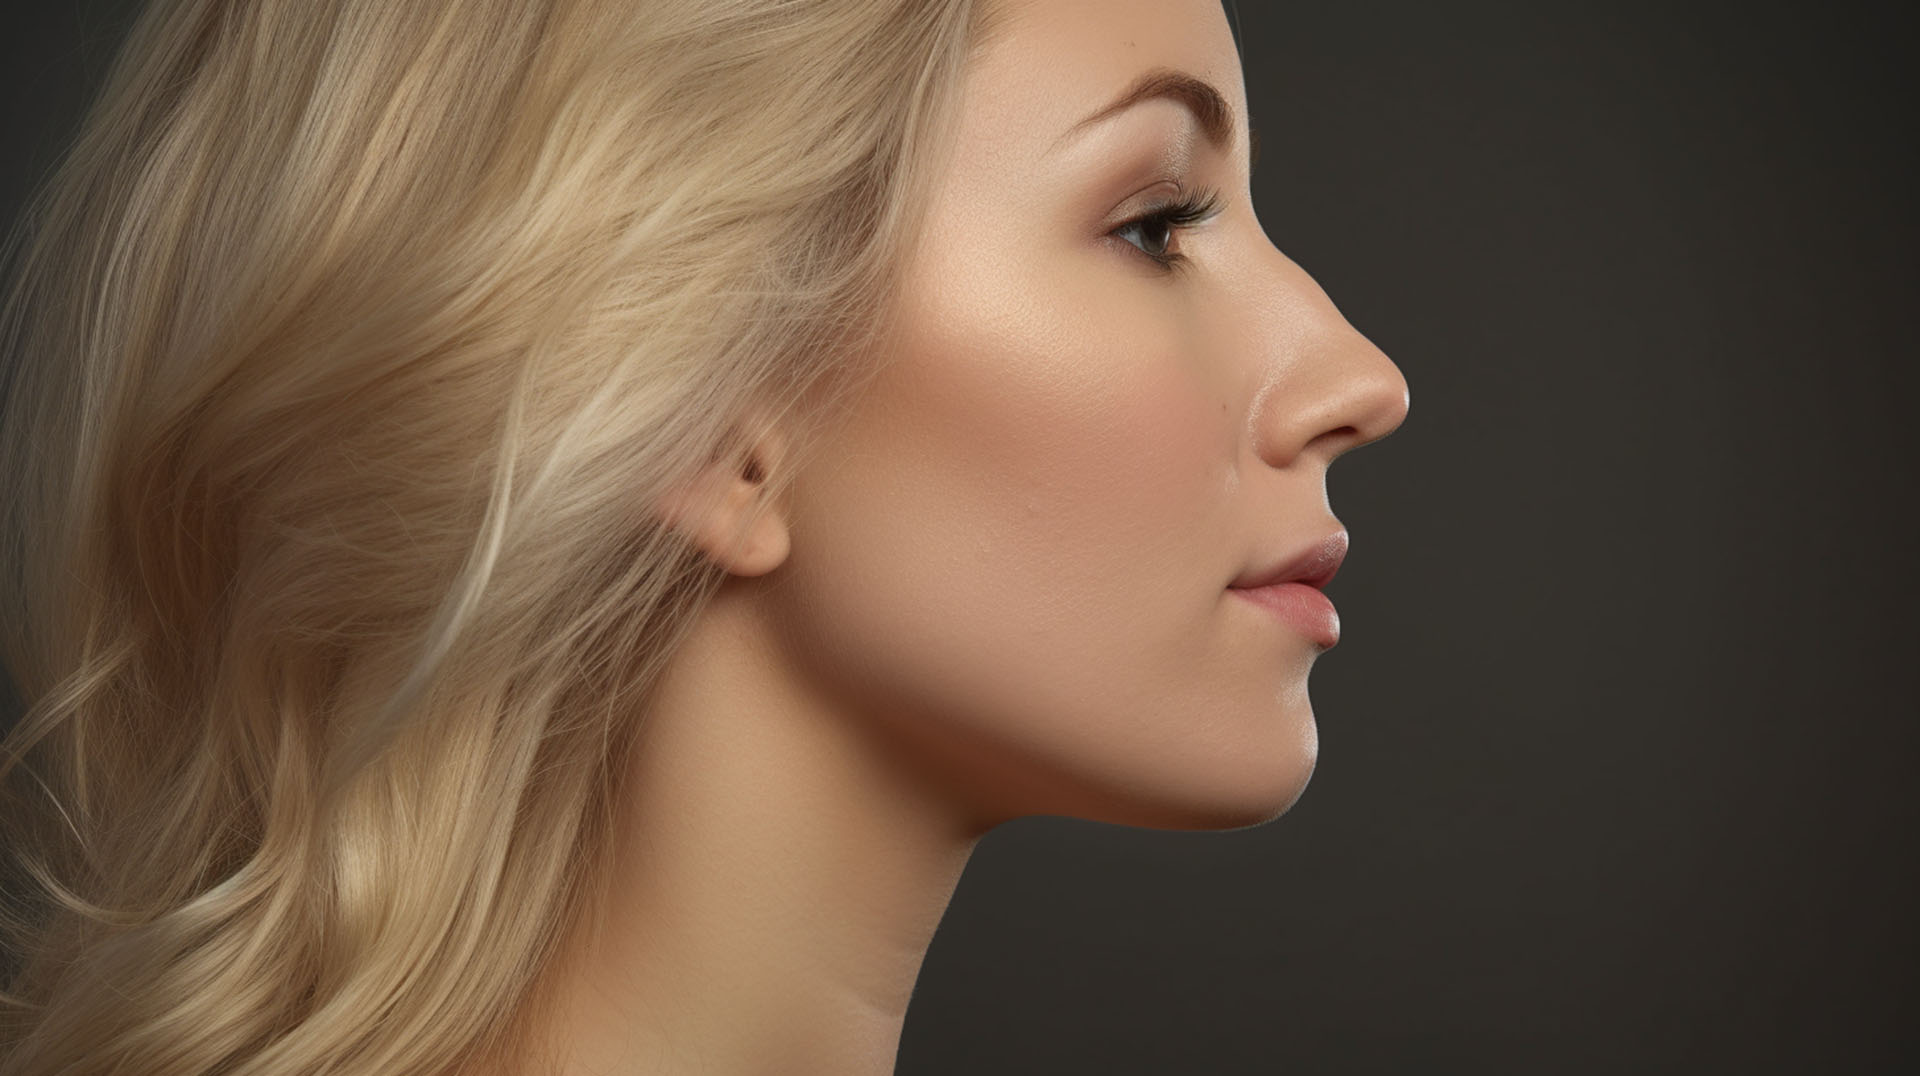 Nose Job in St. Thomas, ON